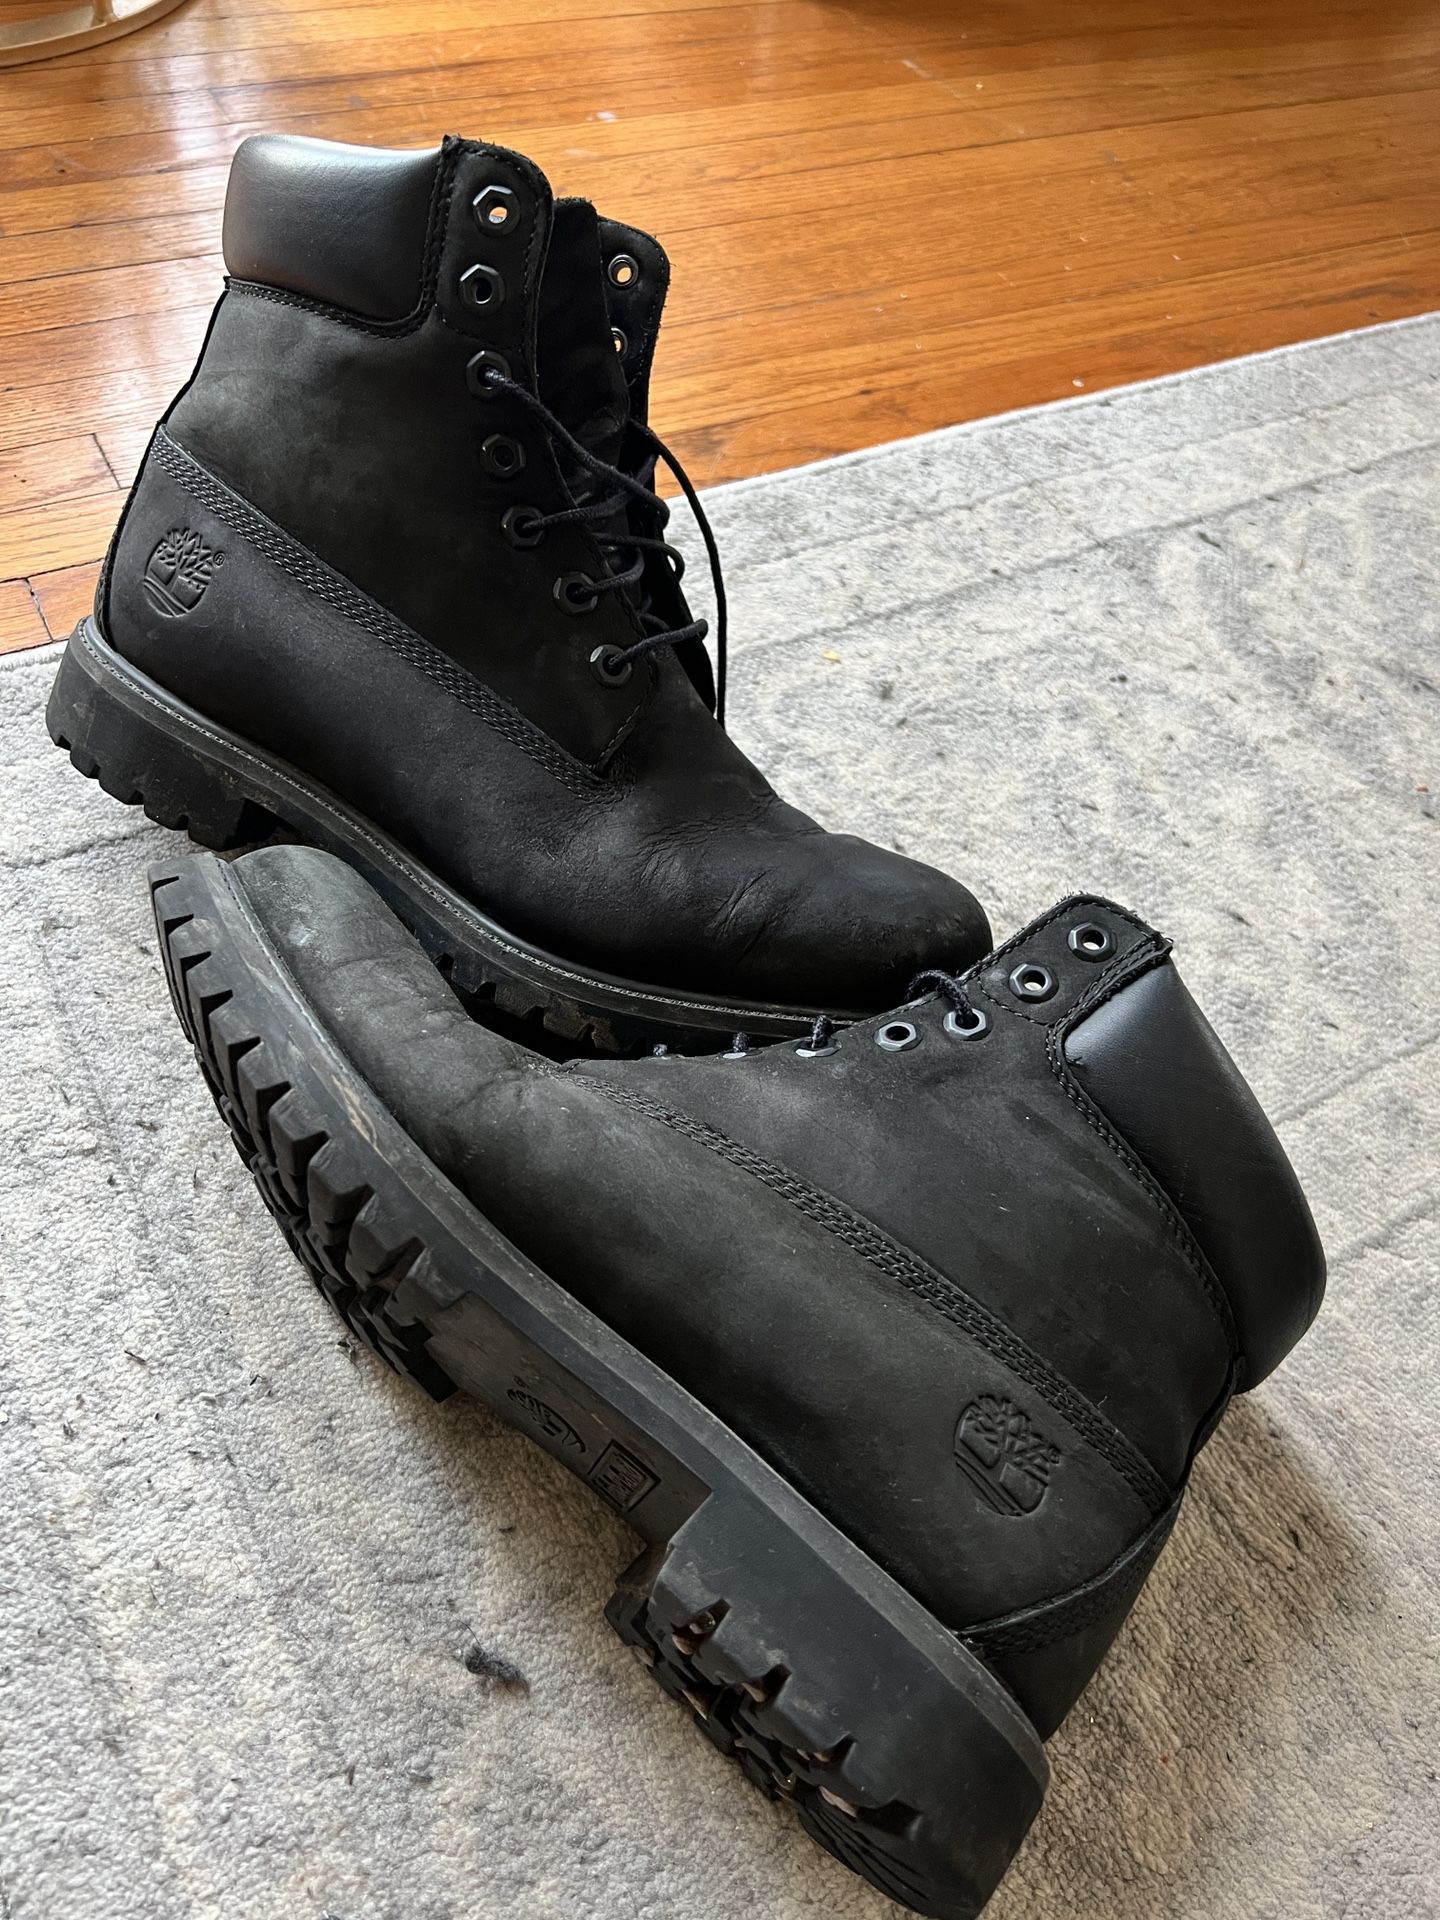 Pigmento Ópera Persona responsable Black Timberland Boots Size 10 for Sale in Long Beach, CA - OfferUp